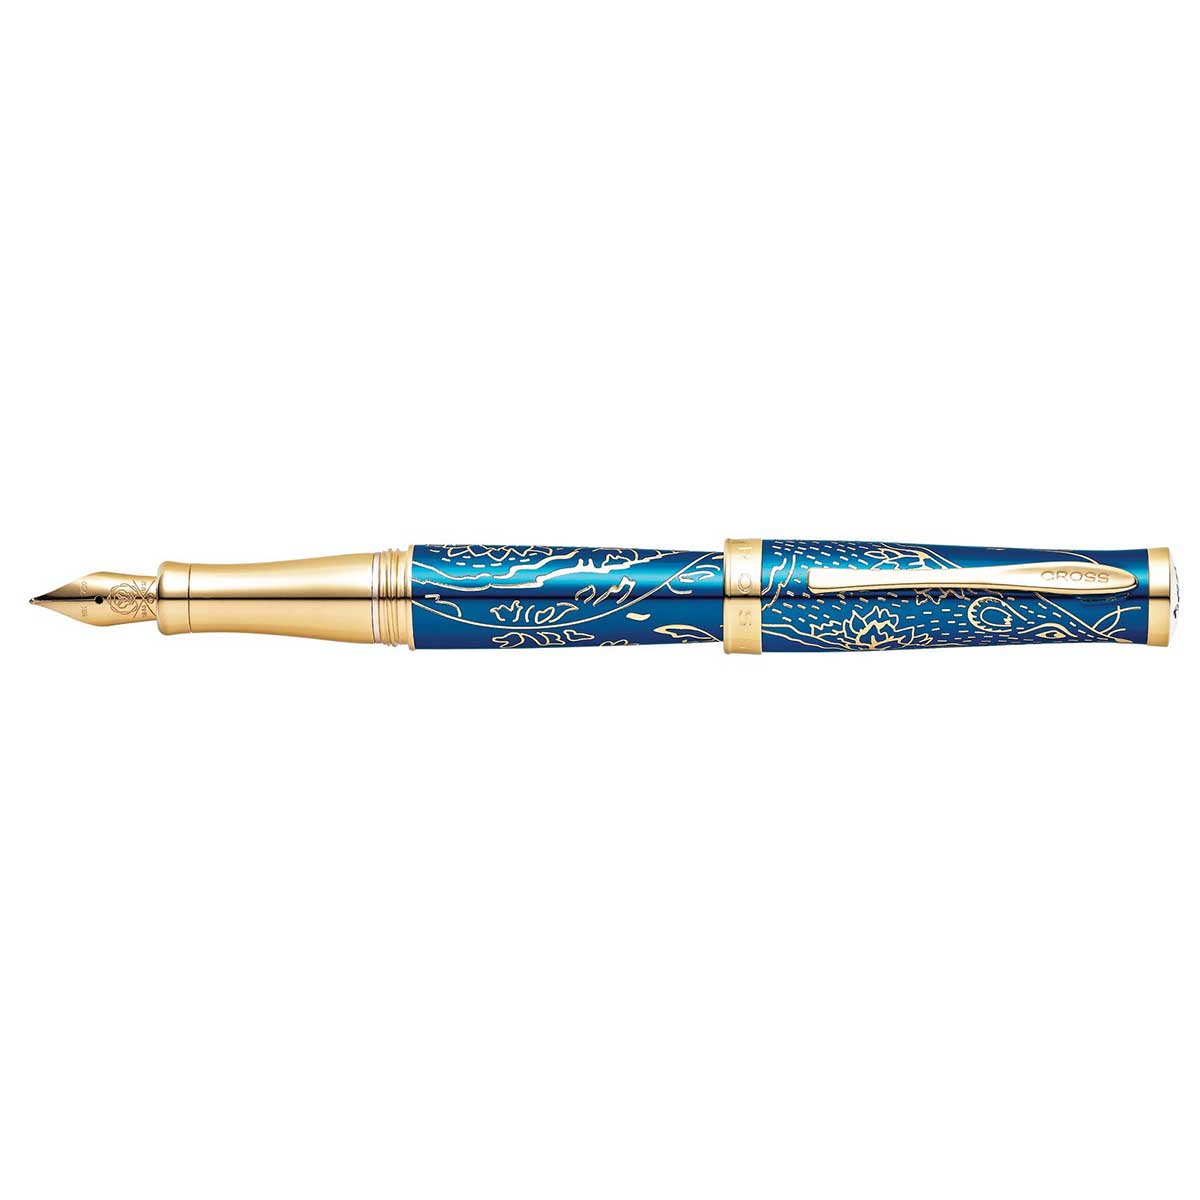 Cross Sauvage 2020 Year of the Rat Special-Edition 18k Gold Medium Nib Fountain Pen (In Standard Cross Gift Box)  Cross Fountain Pens